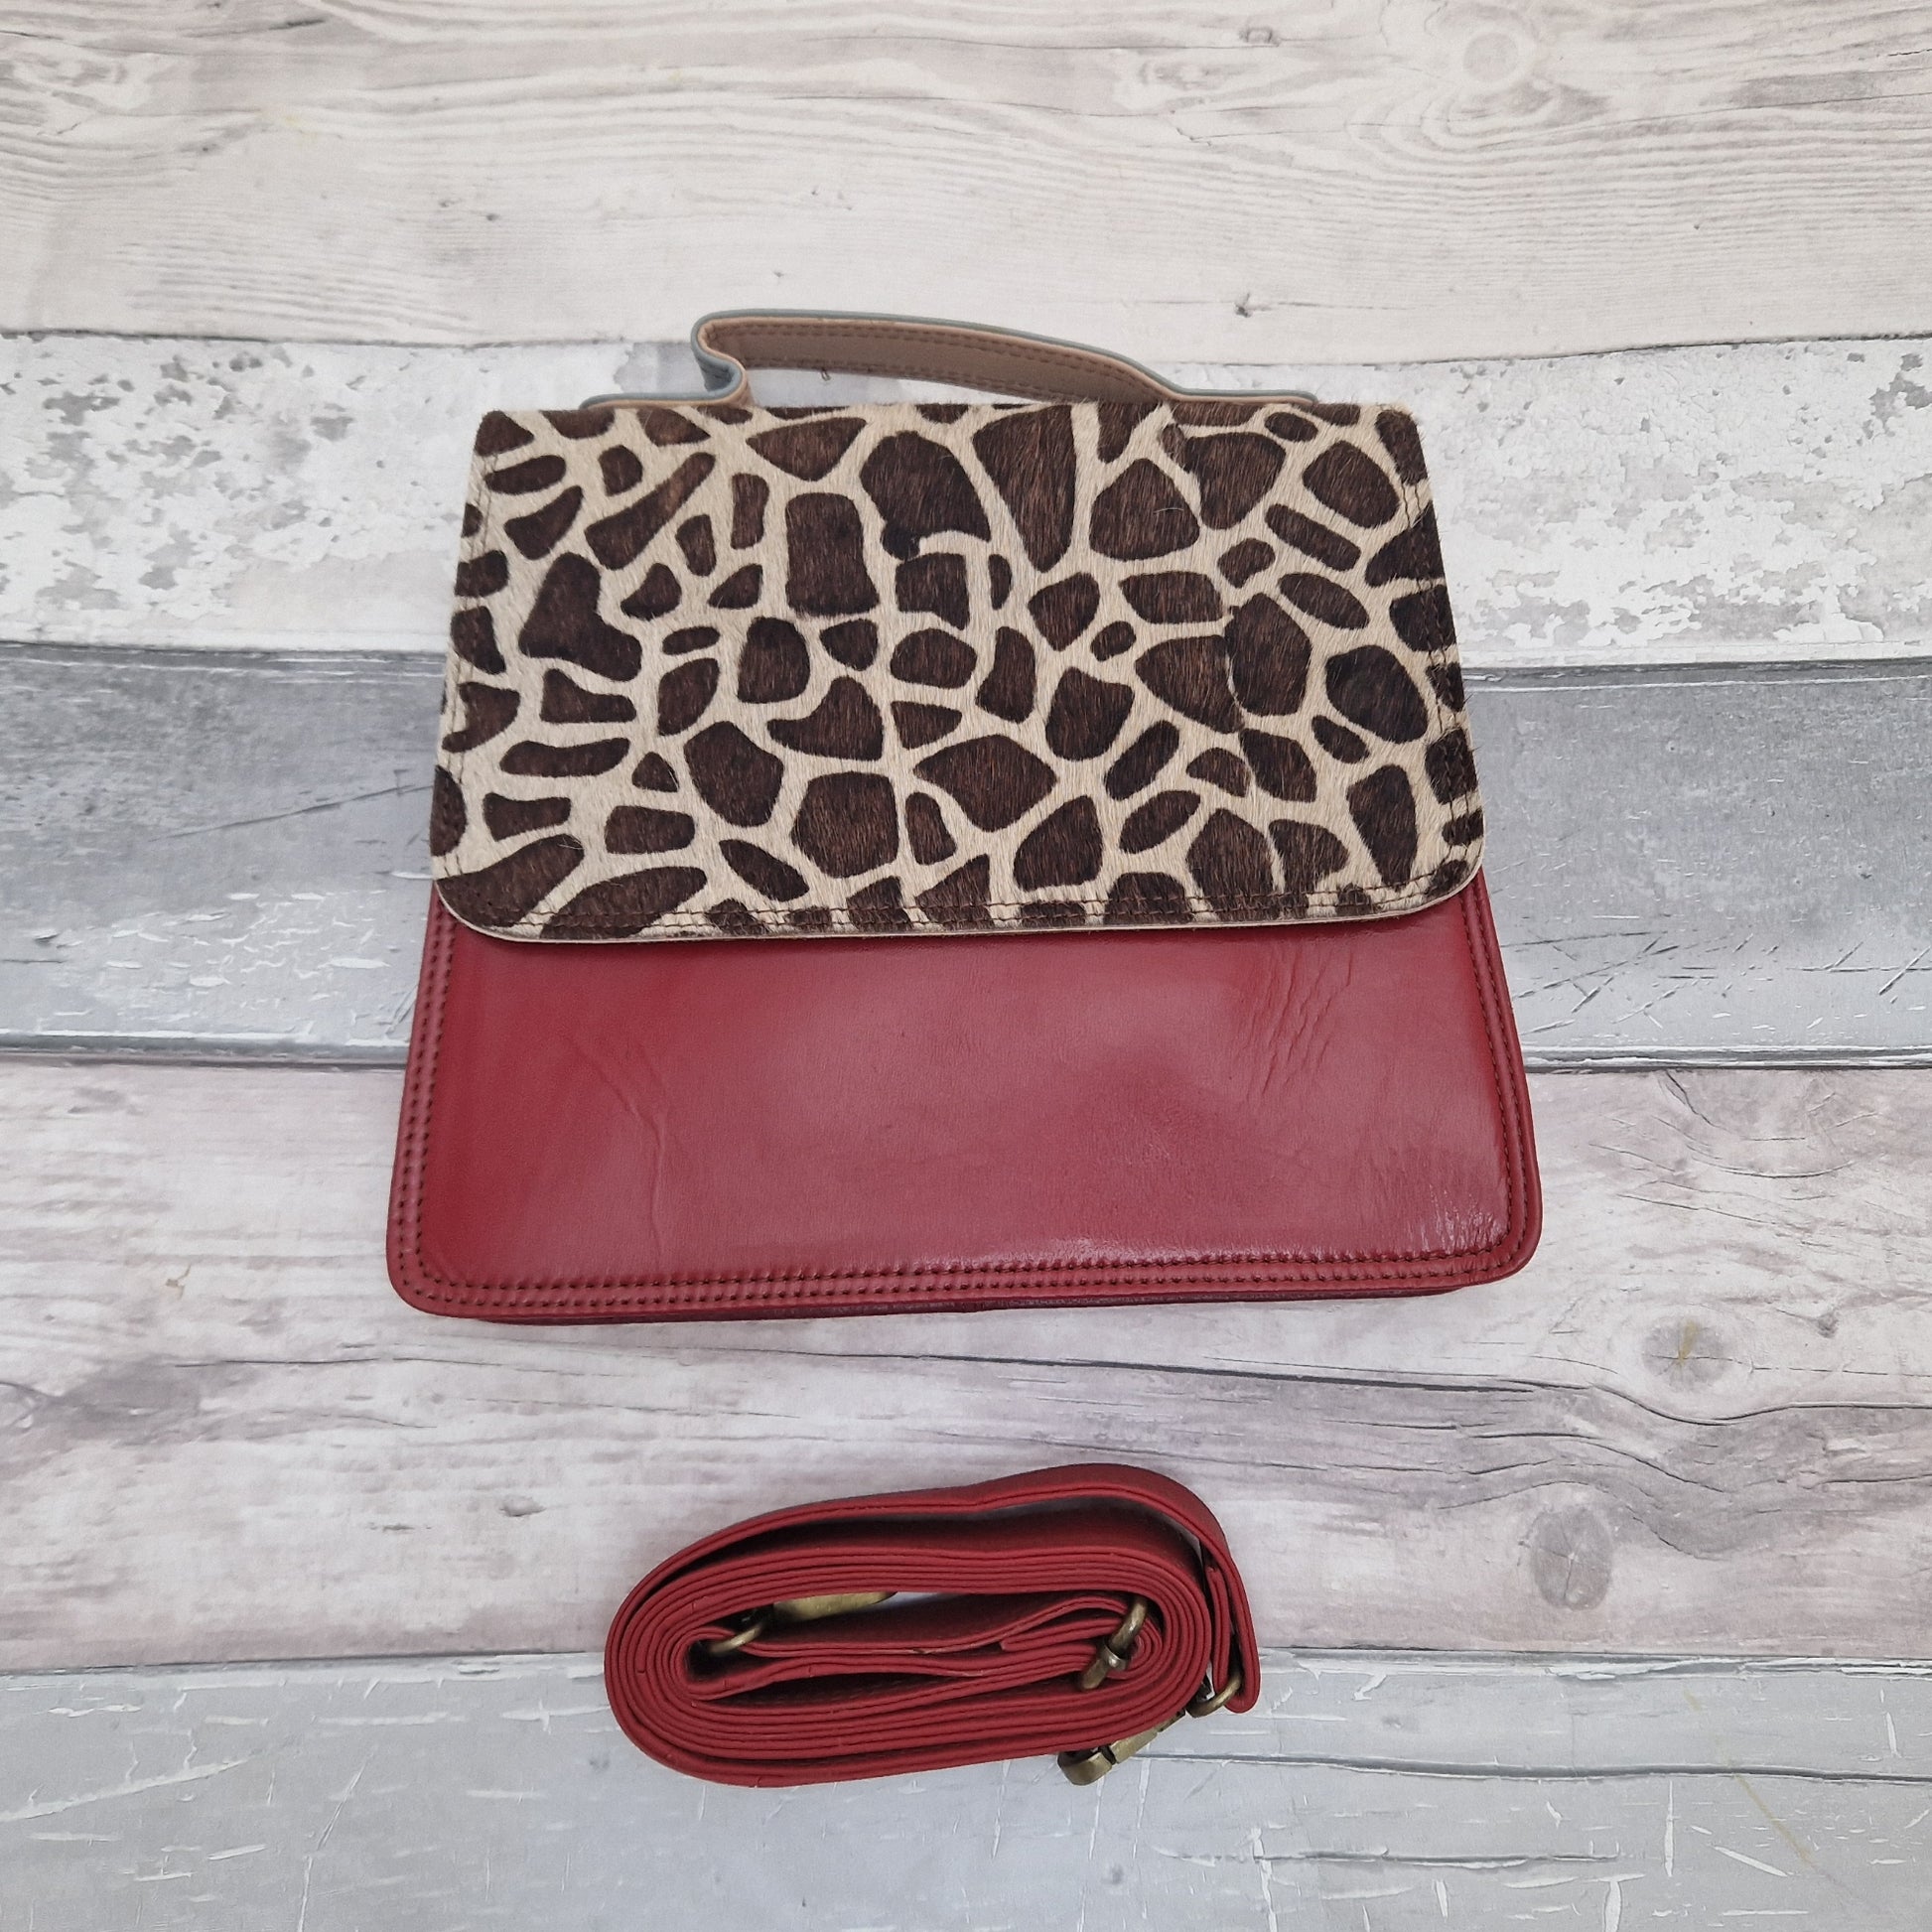 Dark Red leather bag with a textured panel in a giraffe print.